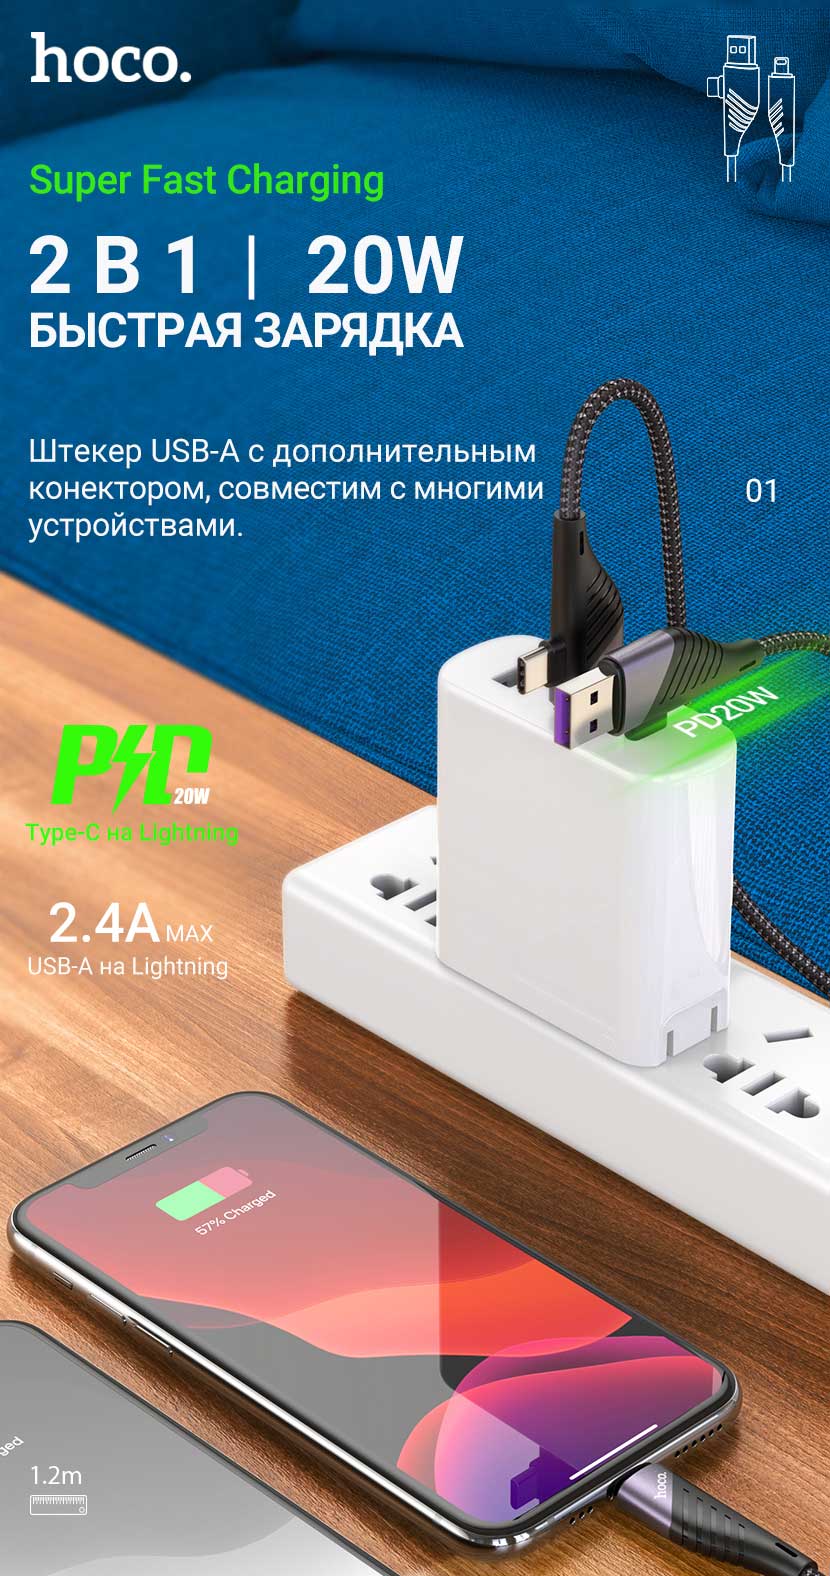 hoco news u95 freeway pd charging data cable 2in1 usb type c to lightning ru